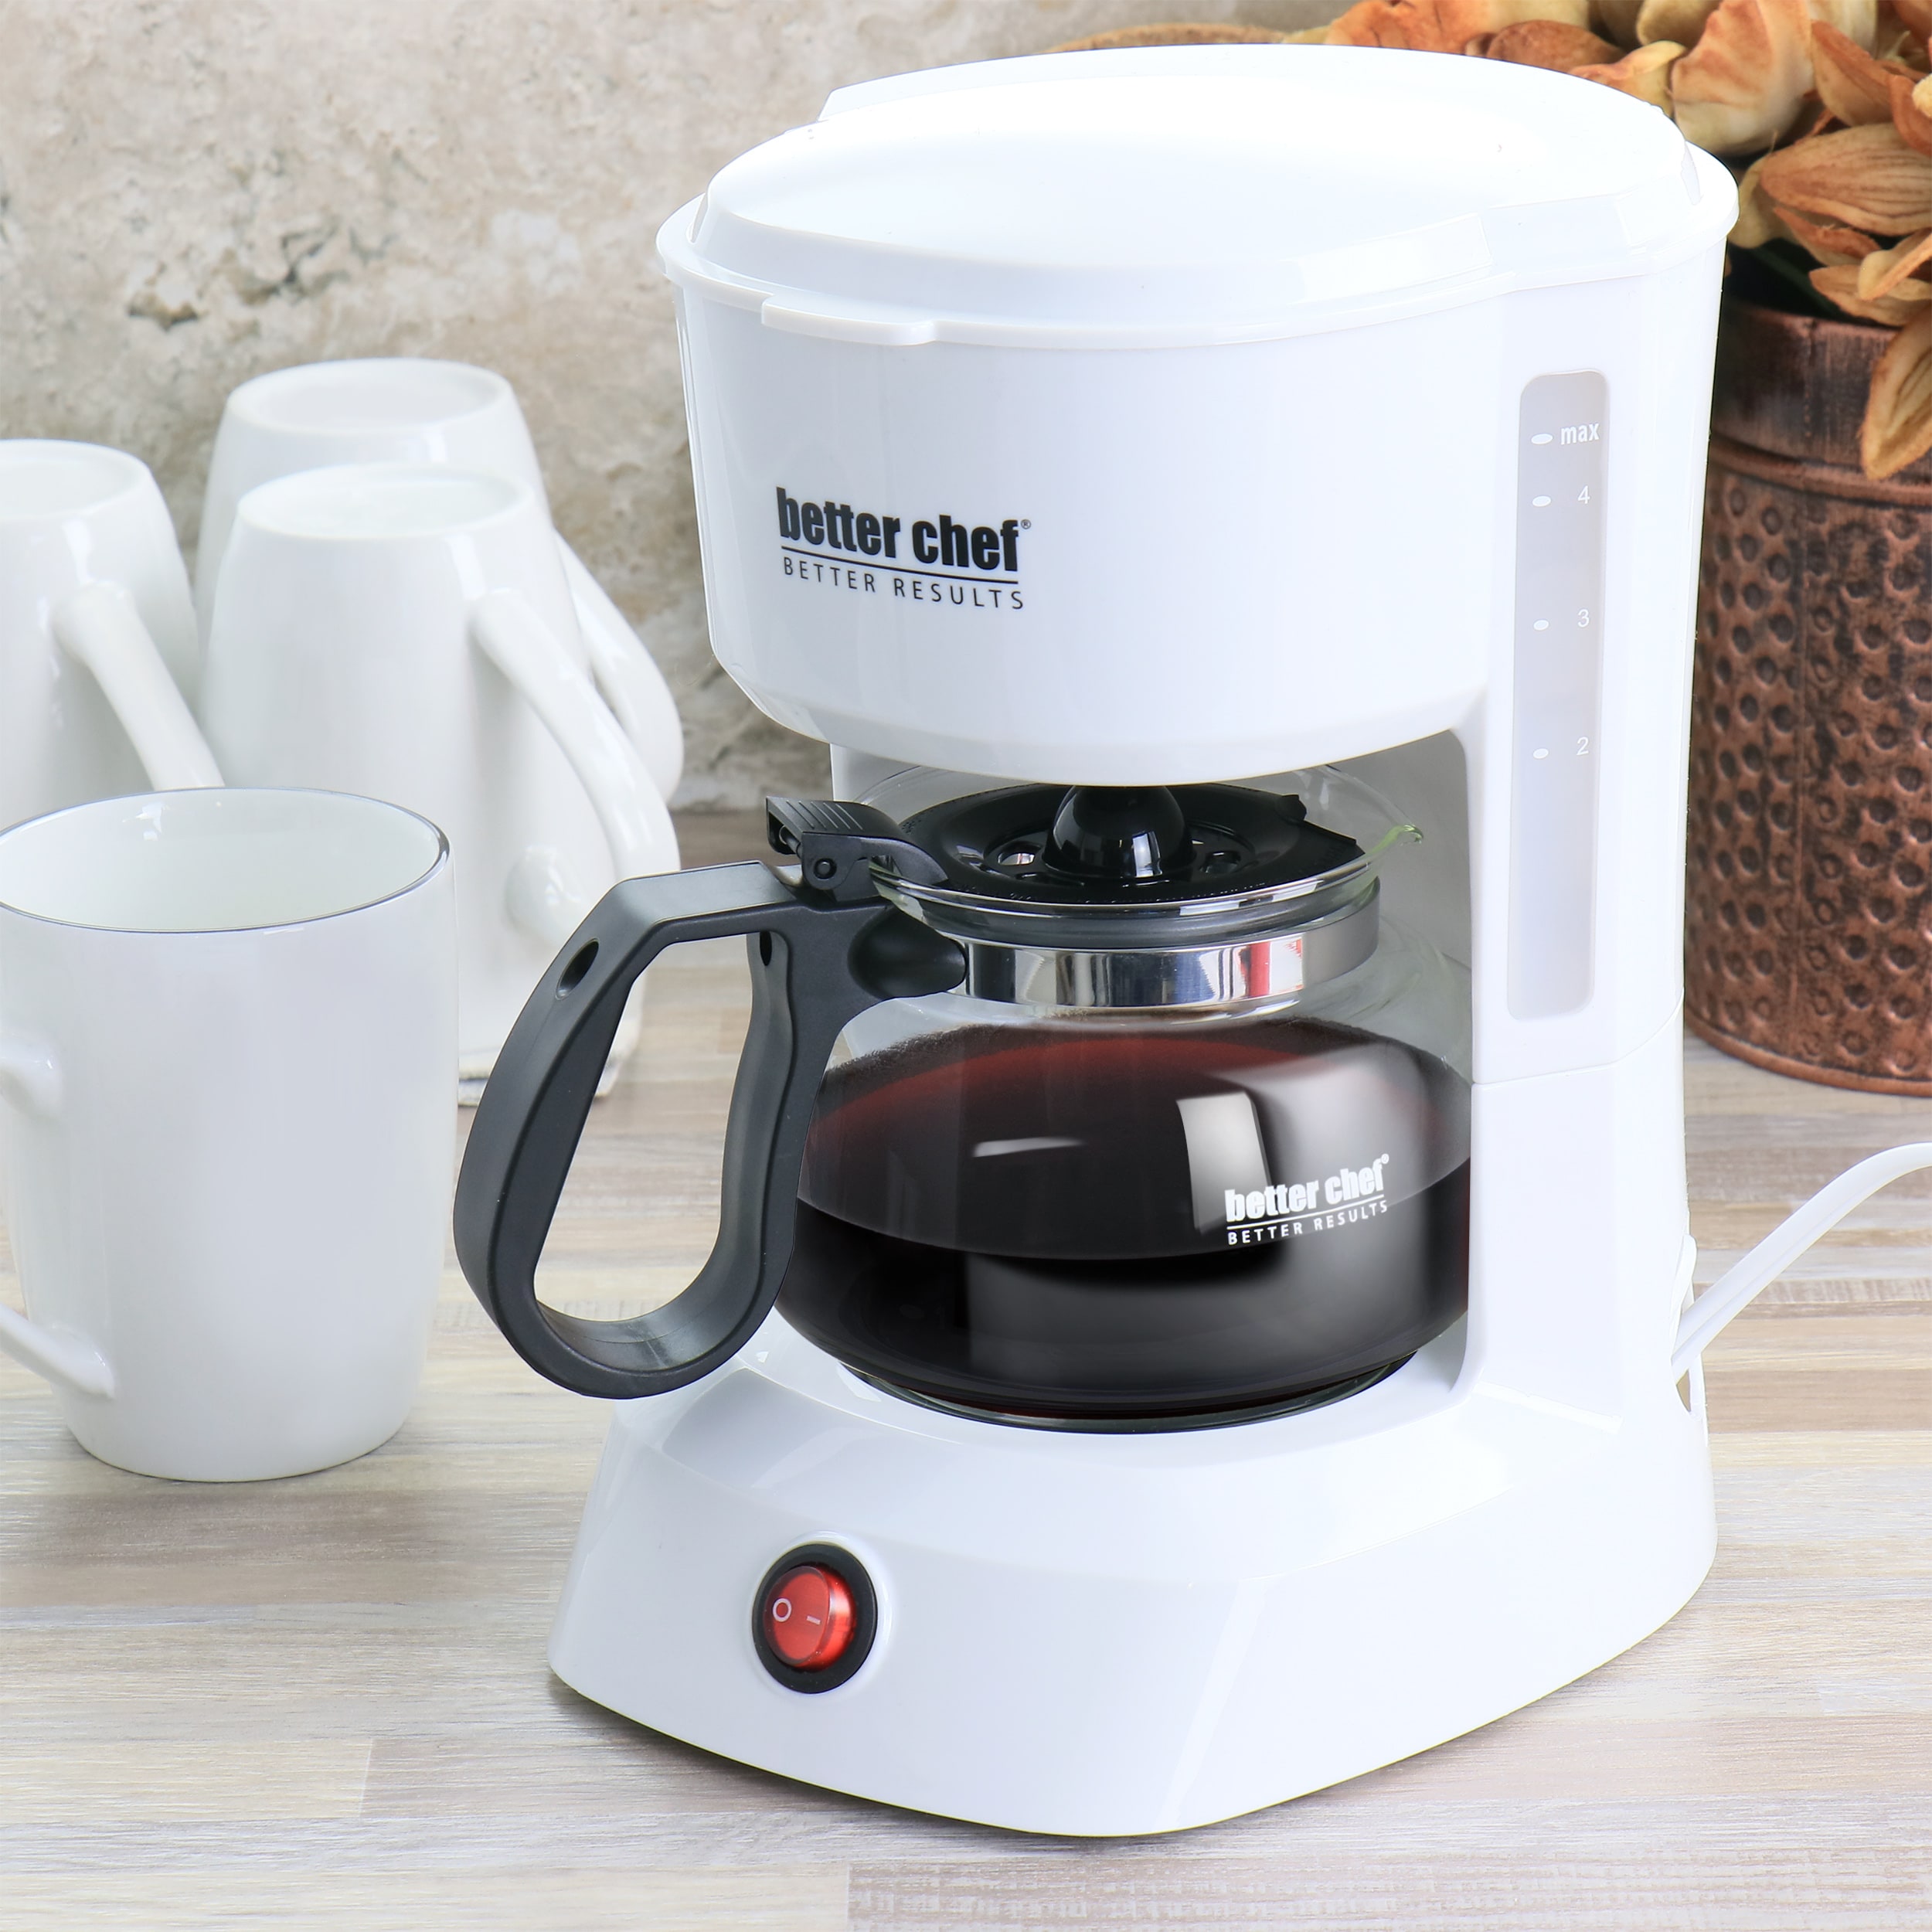 Better Chef 4-Cup Compact Coffee Maker with Removable Filter Basket, White